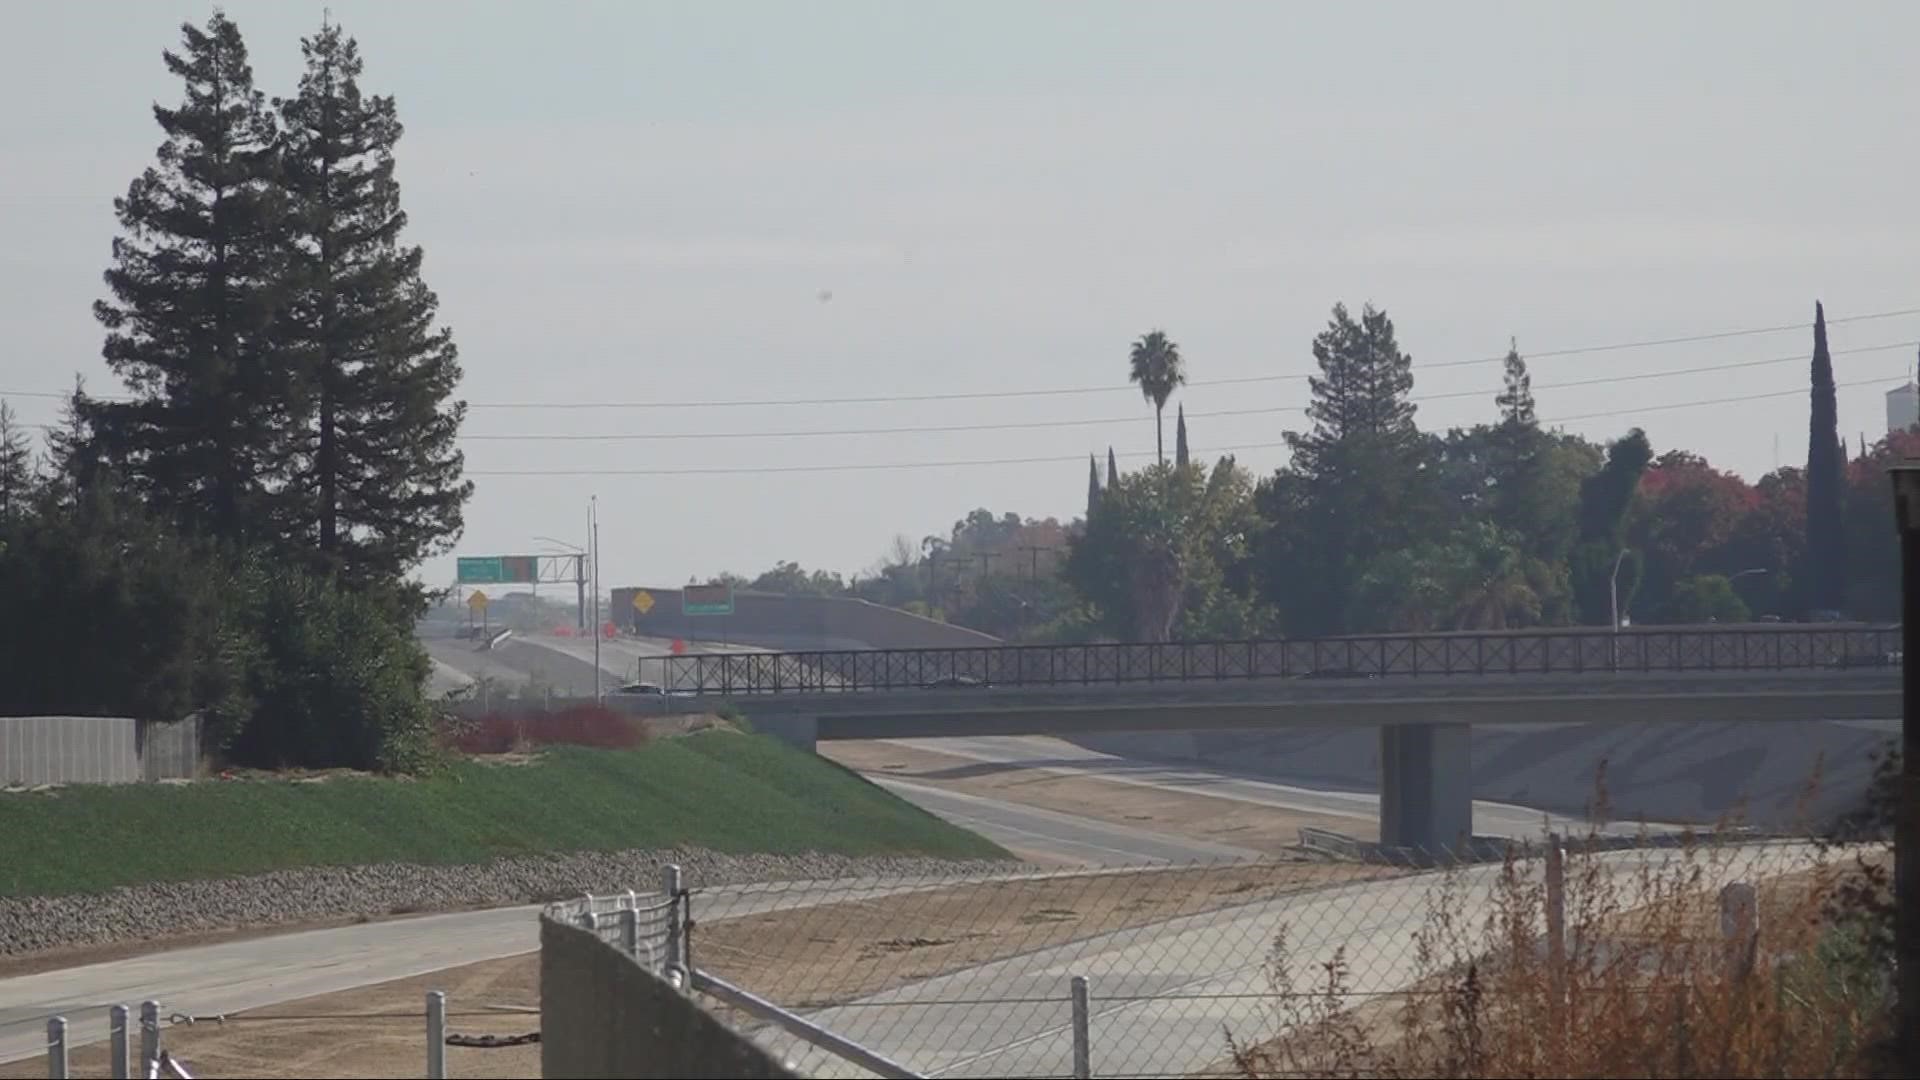 The project aims to relieve congestion and help move traffic more efficiently between Modesto and the Bay Area.